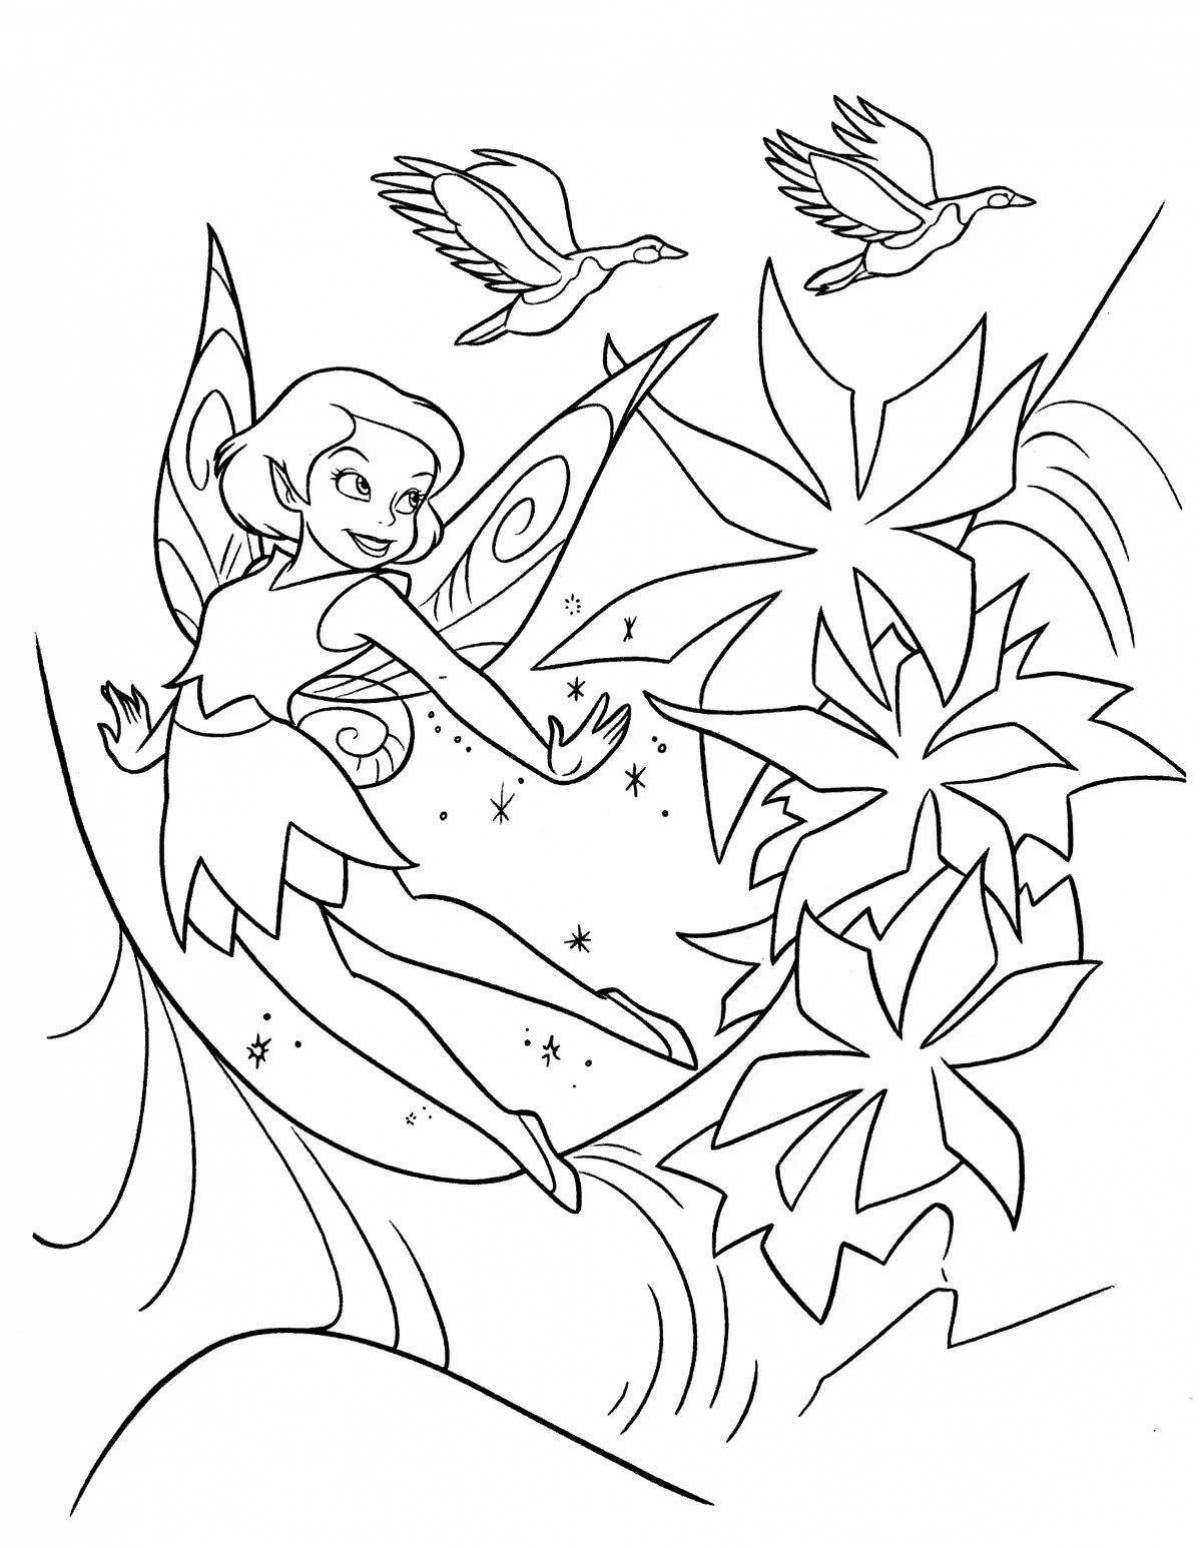 Playful flower fairy coloring book